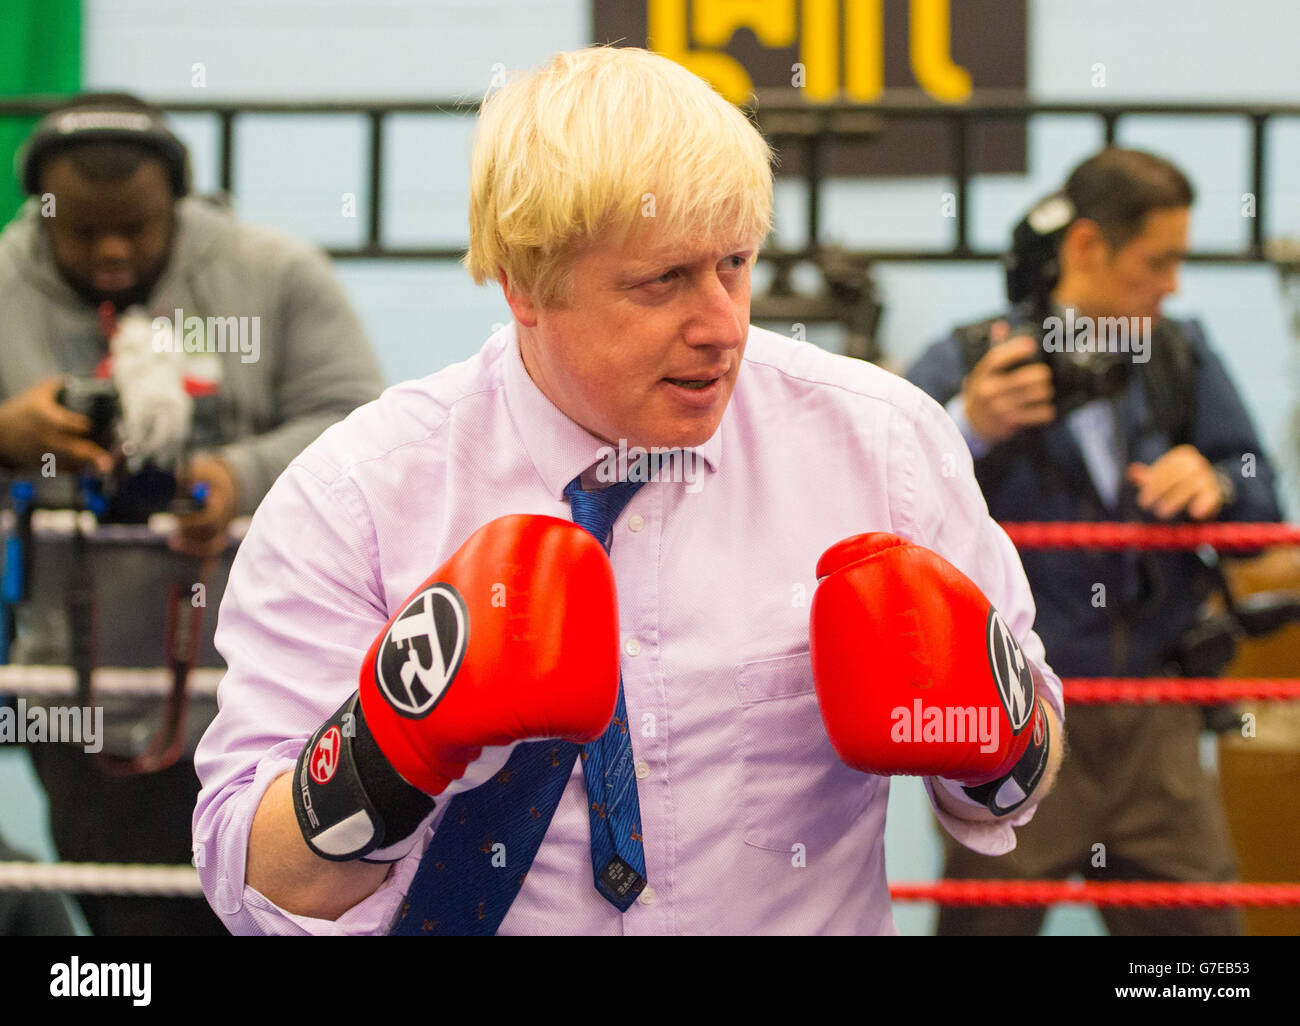 Mayor of London Boris Johnson takes part in a boxing session during a visit to the Fight for Peace boxing academy, which works with young people at risk of crime an violence in North Woolwich, east London. Stock Photo